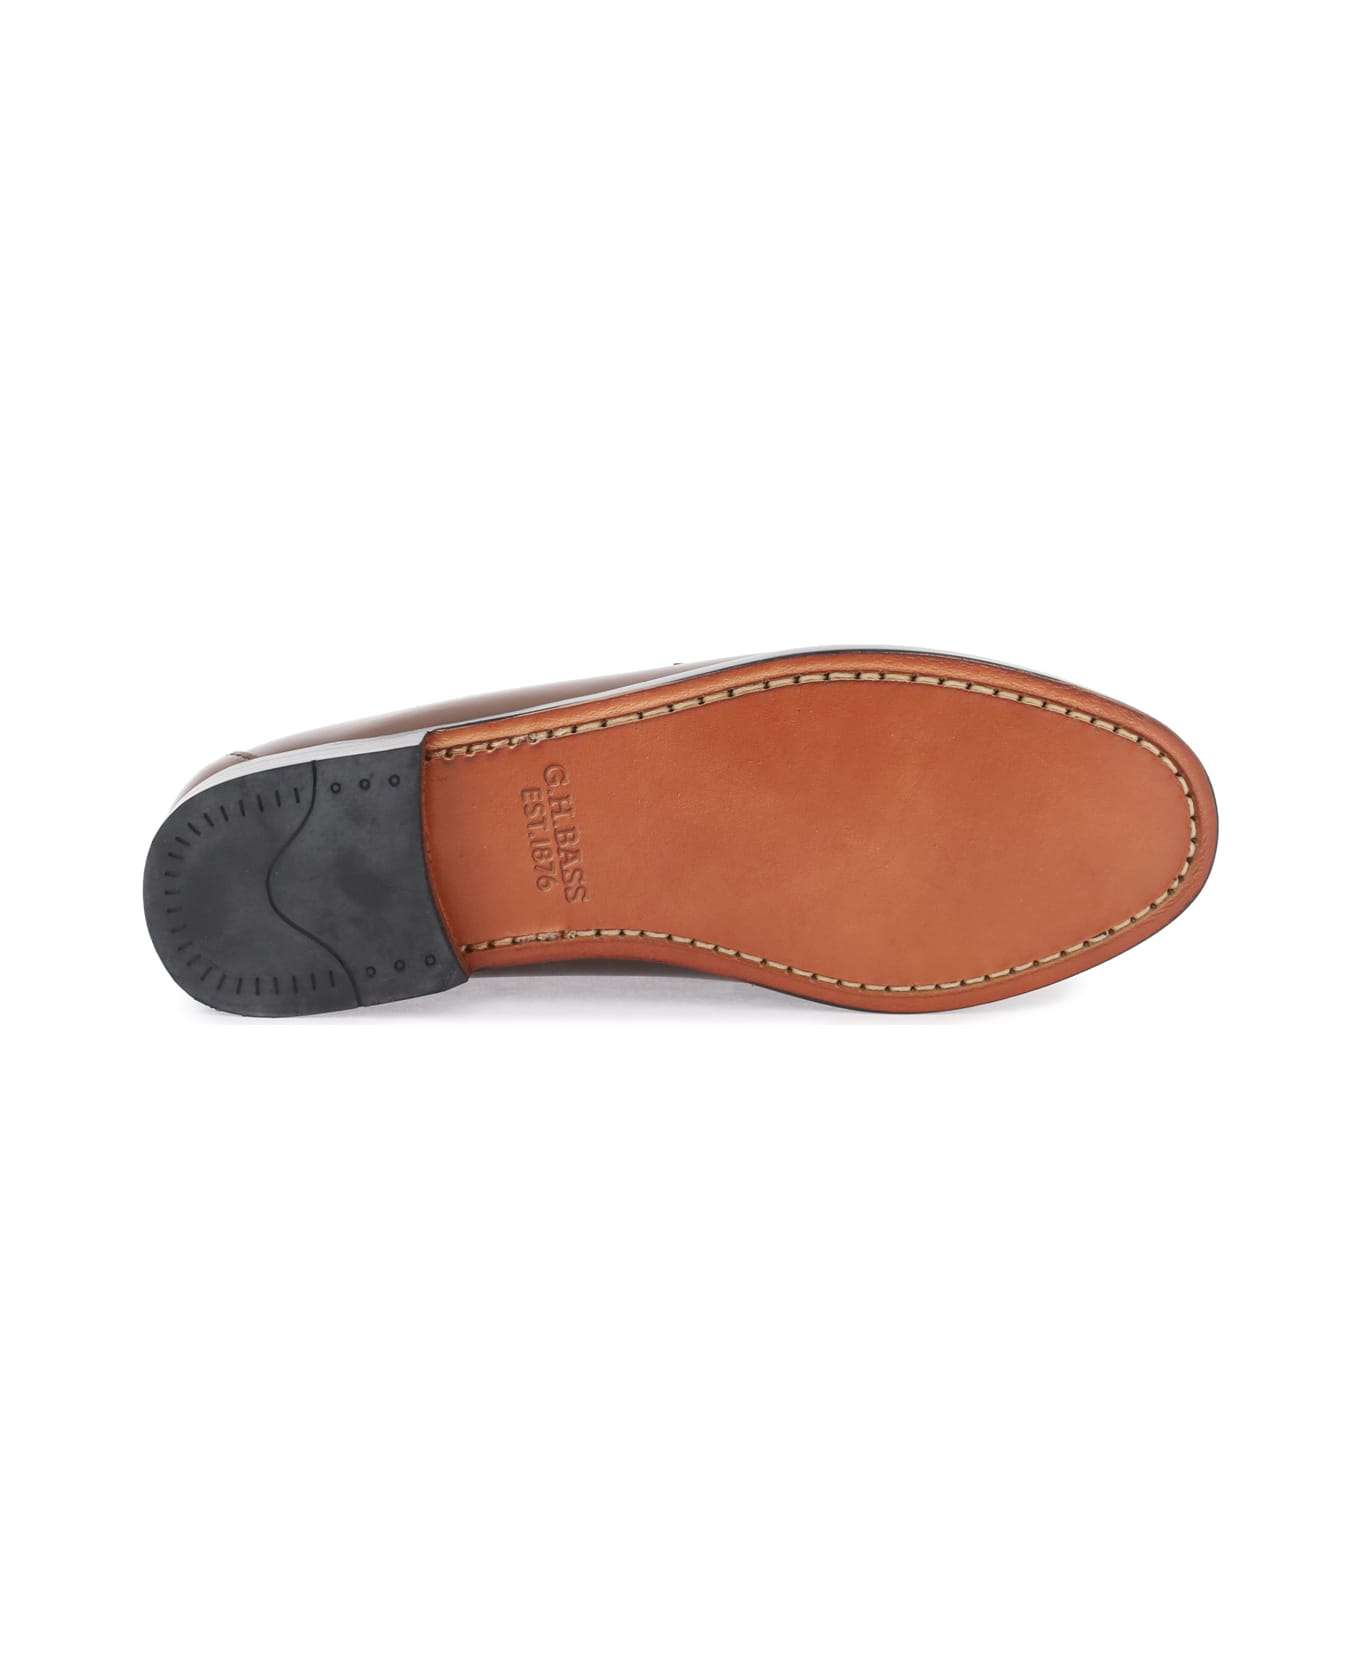 G.H.Bass & Co. Weejuns Penny Loafers - COGNAC (Brown)